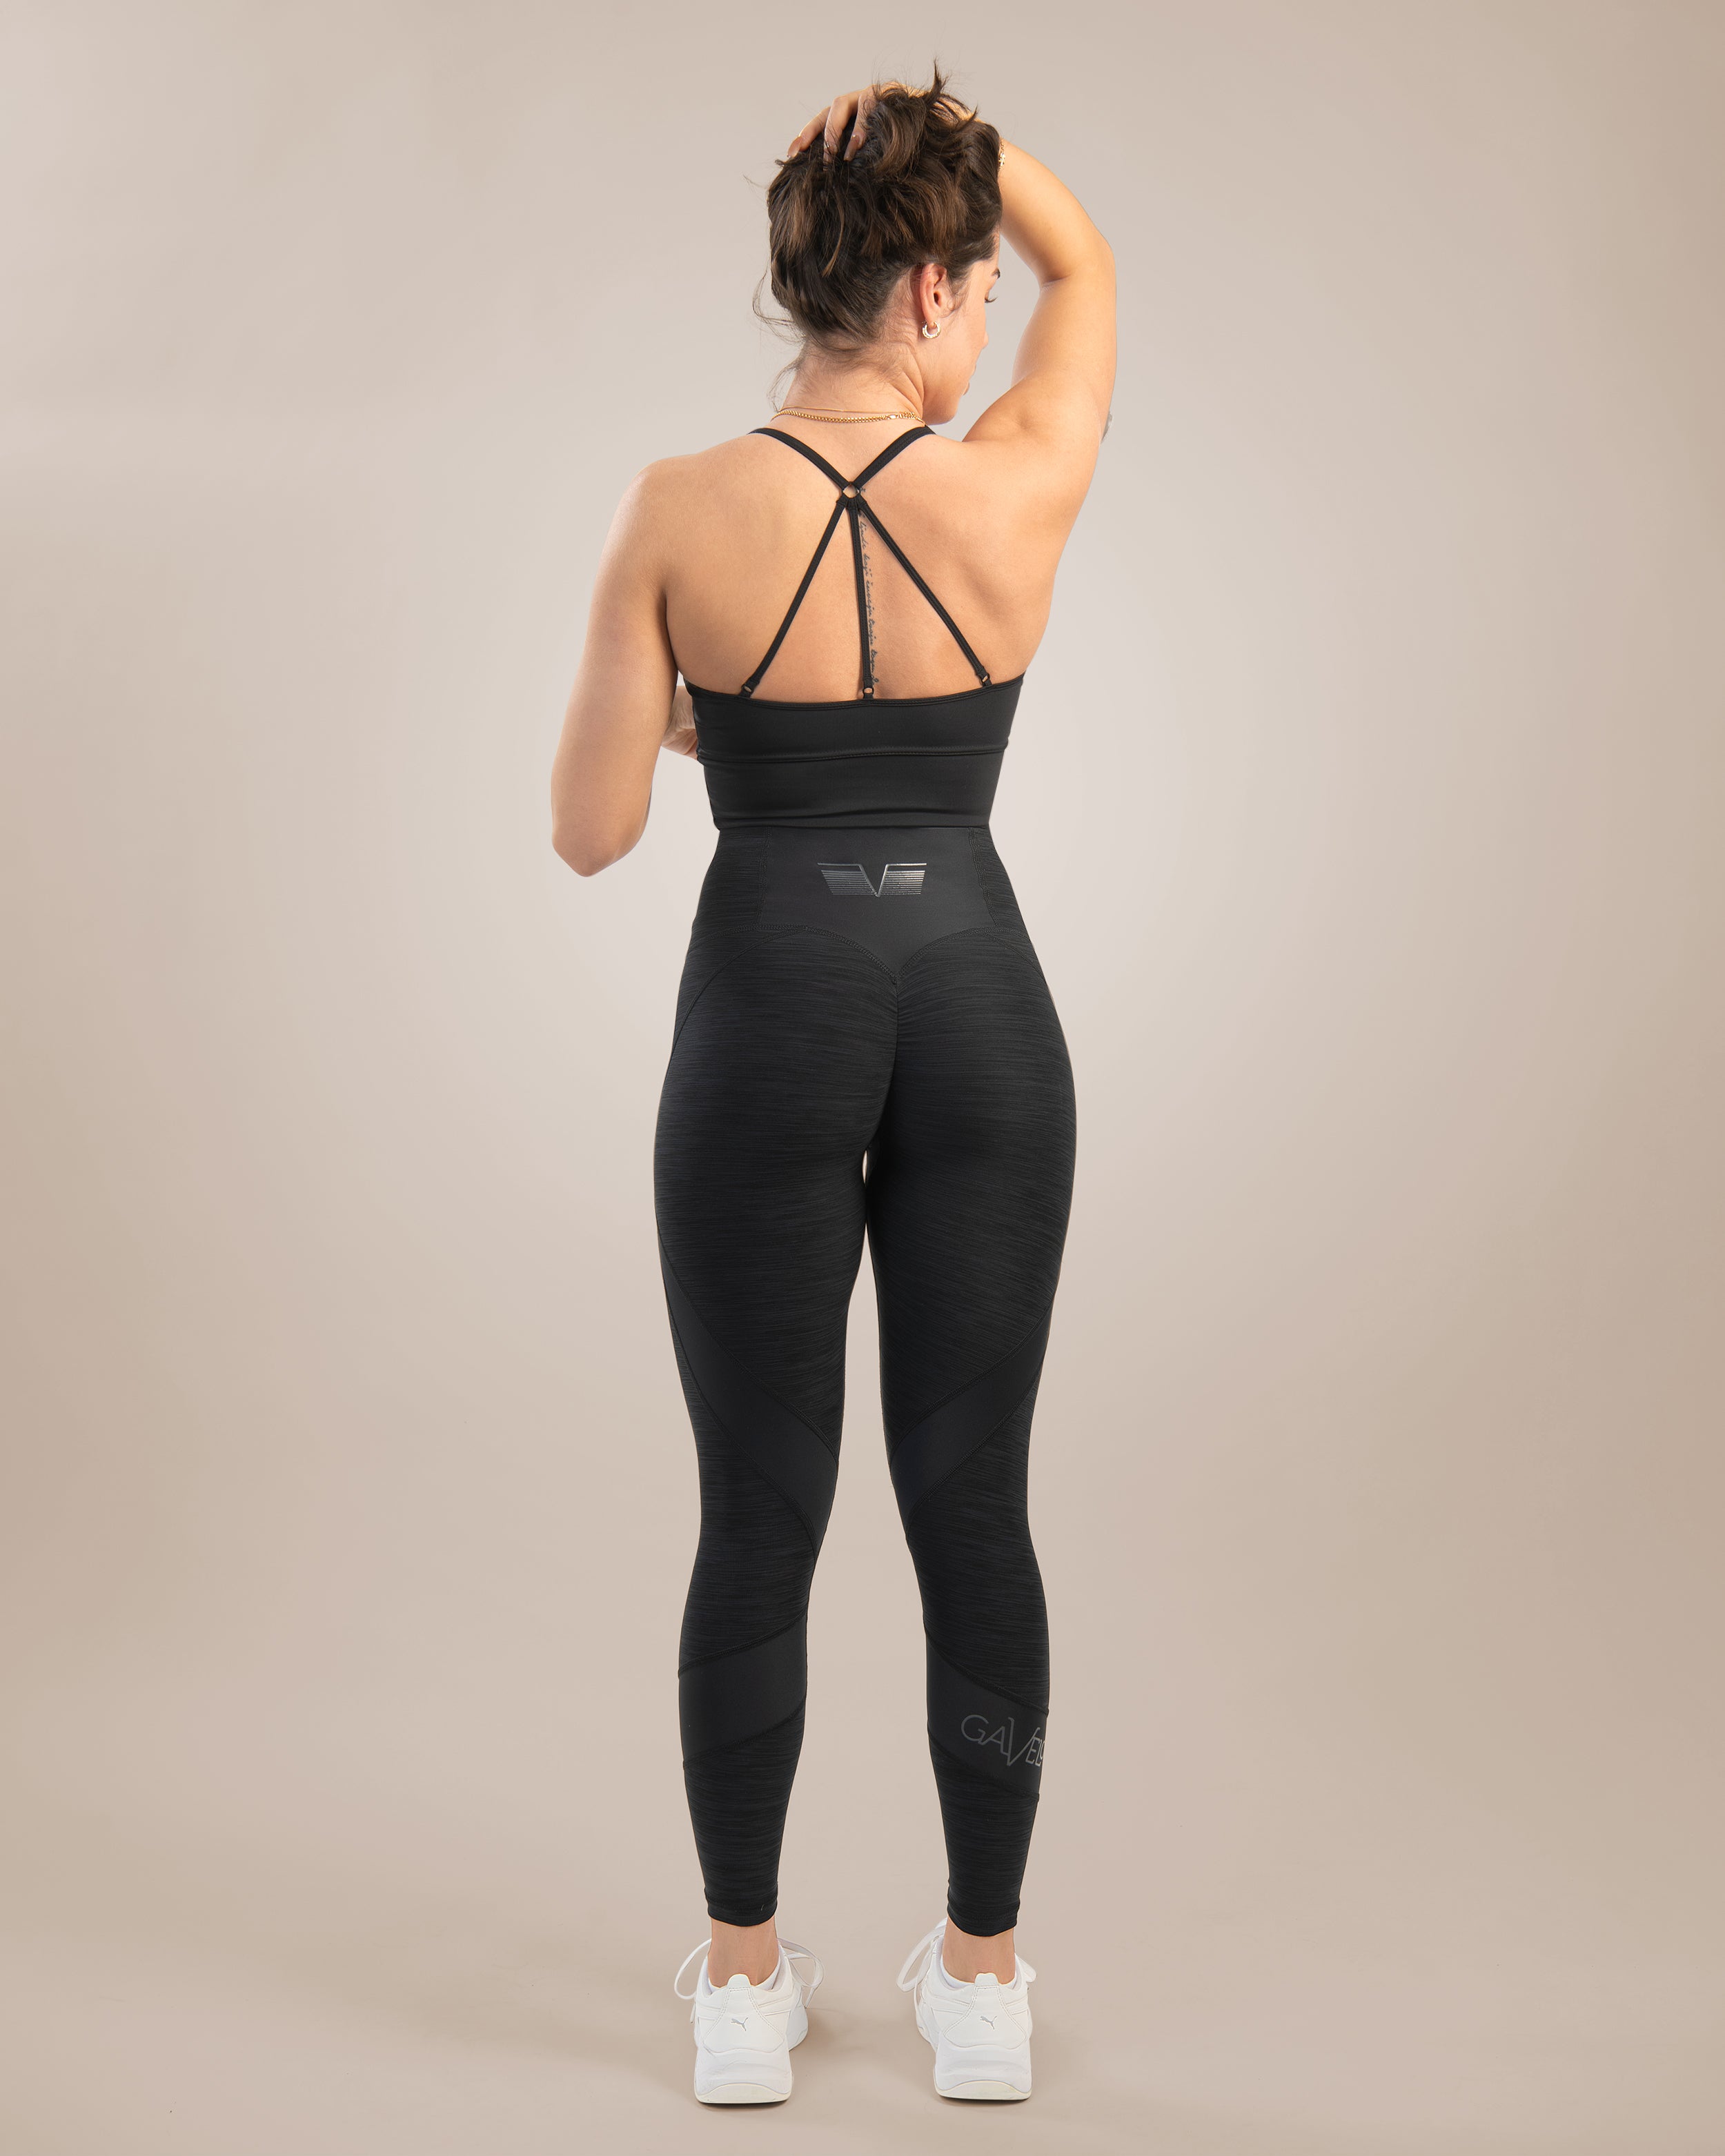 CHILY FIT Gavelo Seamless Sport BH Pulse Nude Olive